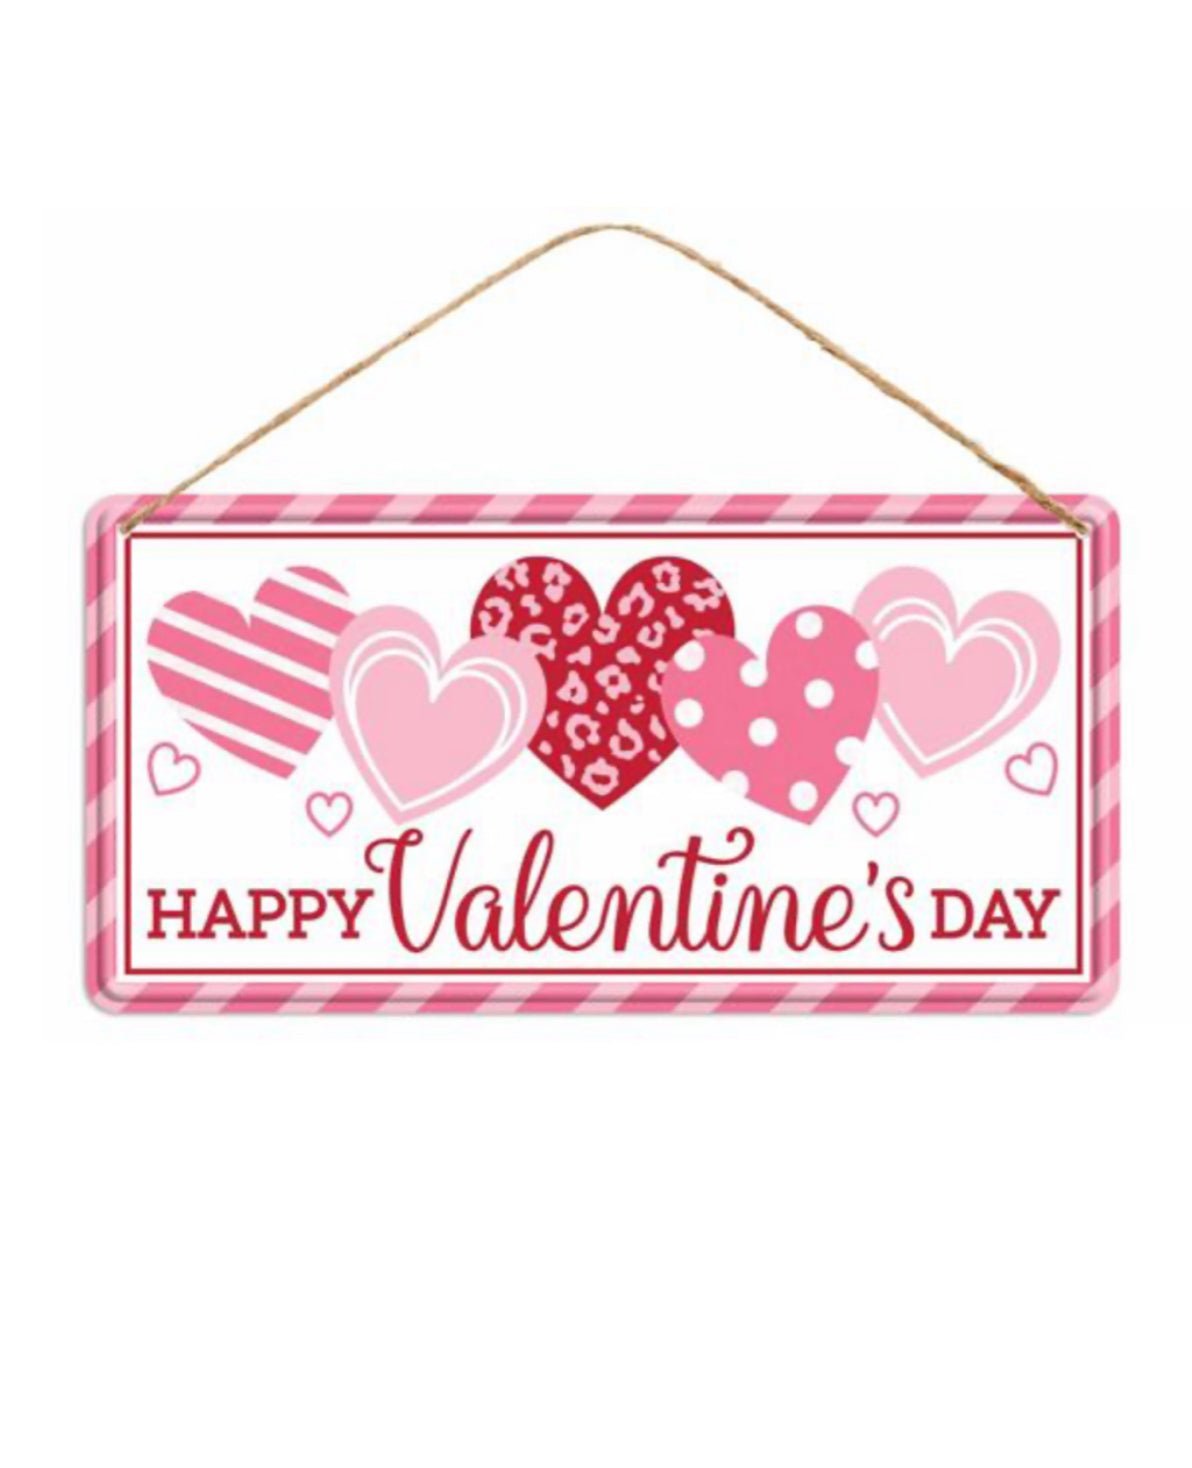 Happy Valentine’s Day heart metal sign - Greenery Marketsigns for wreathsMD1234